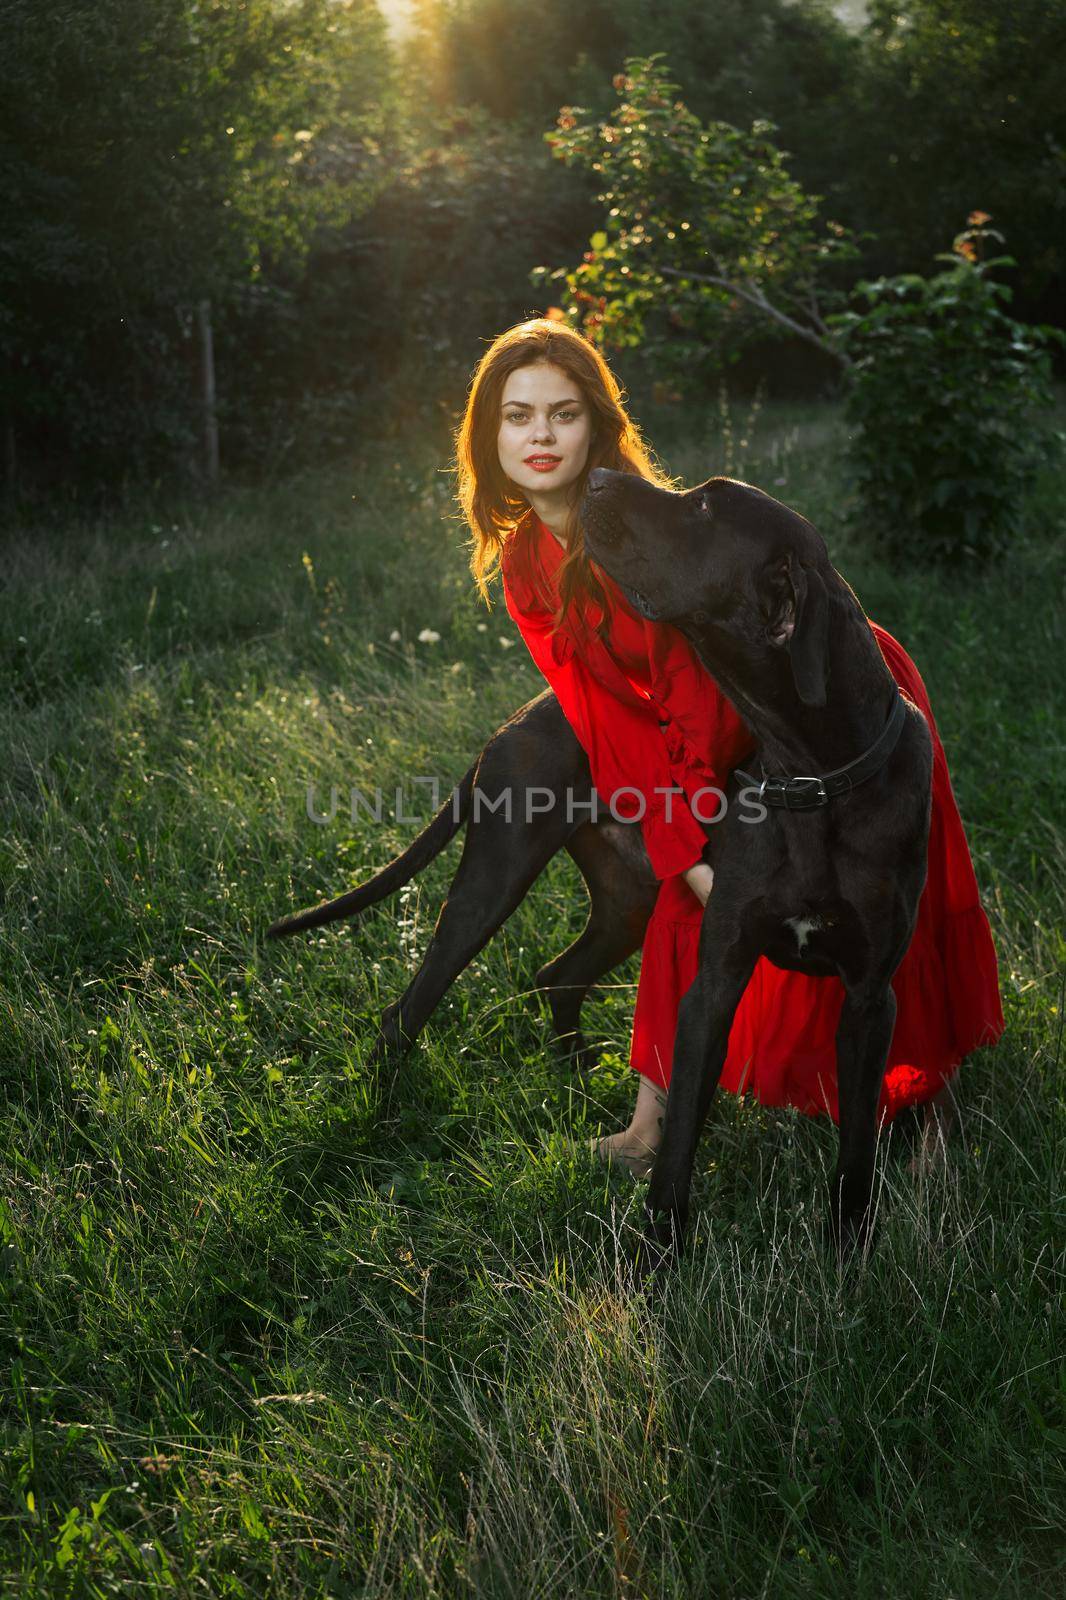 woman in a red dress in a field with a black dog Friendship fun. High quality photo